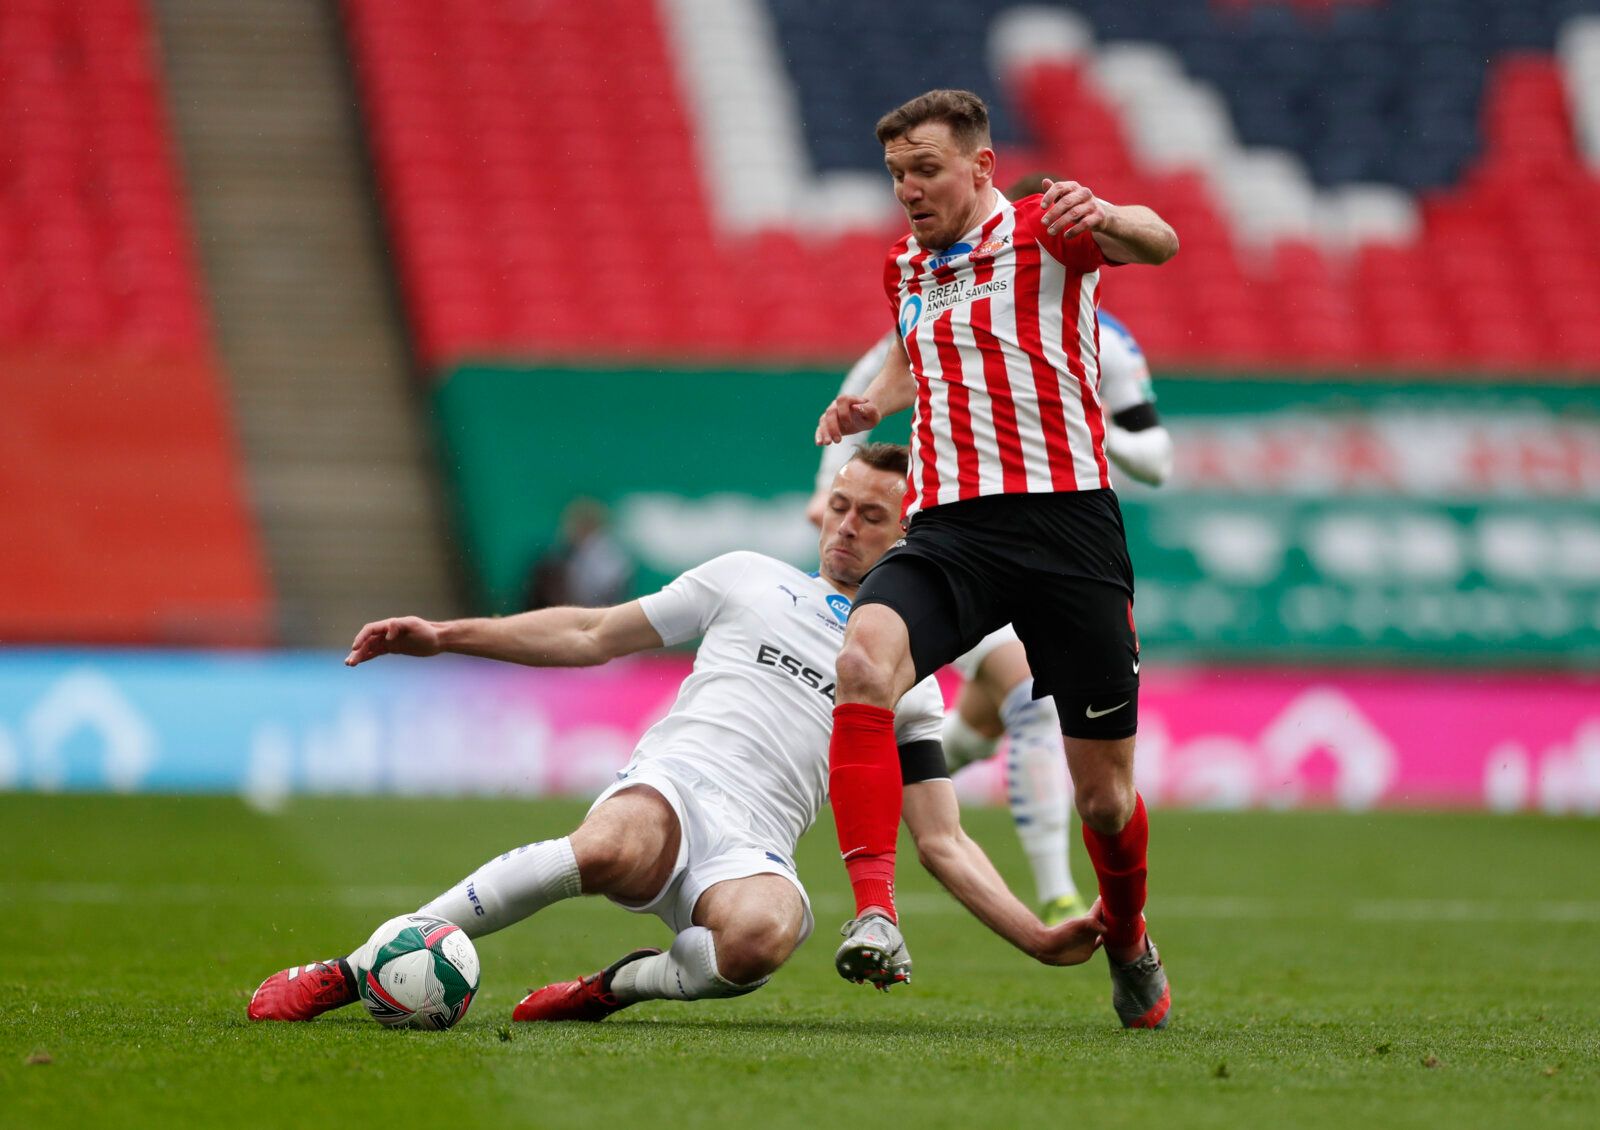 Soccer Football - EFL Trophy Final - Sunderland v Tranmere Rovers - Wembley Stadium, London, Britain - March 14, 2021 Sunderland's Charlie Wyke in action with Tranmere's George Ray Action Images/Lee Smith EDITORIAL USE ONLY. No use with unauthorized audio, video, data, fixture lists, club/league logos or 'live' services. Online in-match use limited to 75 images, no video emulation. No use in betting, games or single club /league/player publications.  Please contact your account representative fo